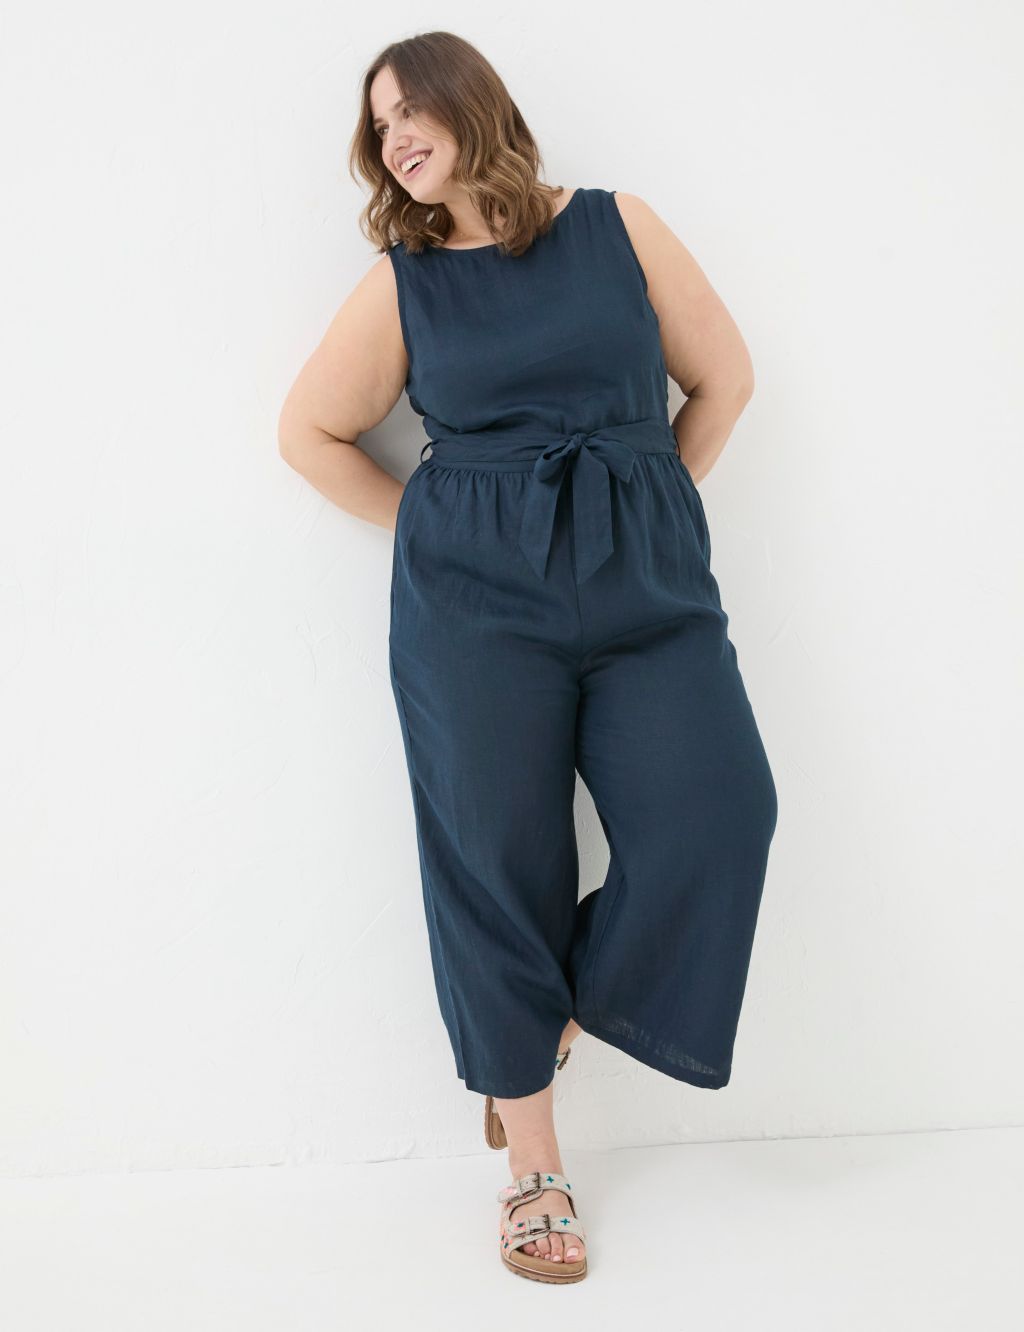 Buy Pure Linen Sleeveless Cropped Jumpsuit | FatFace | M&S